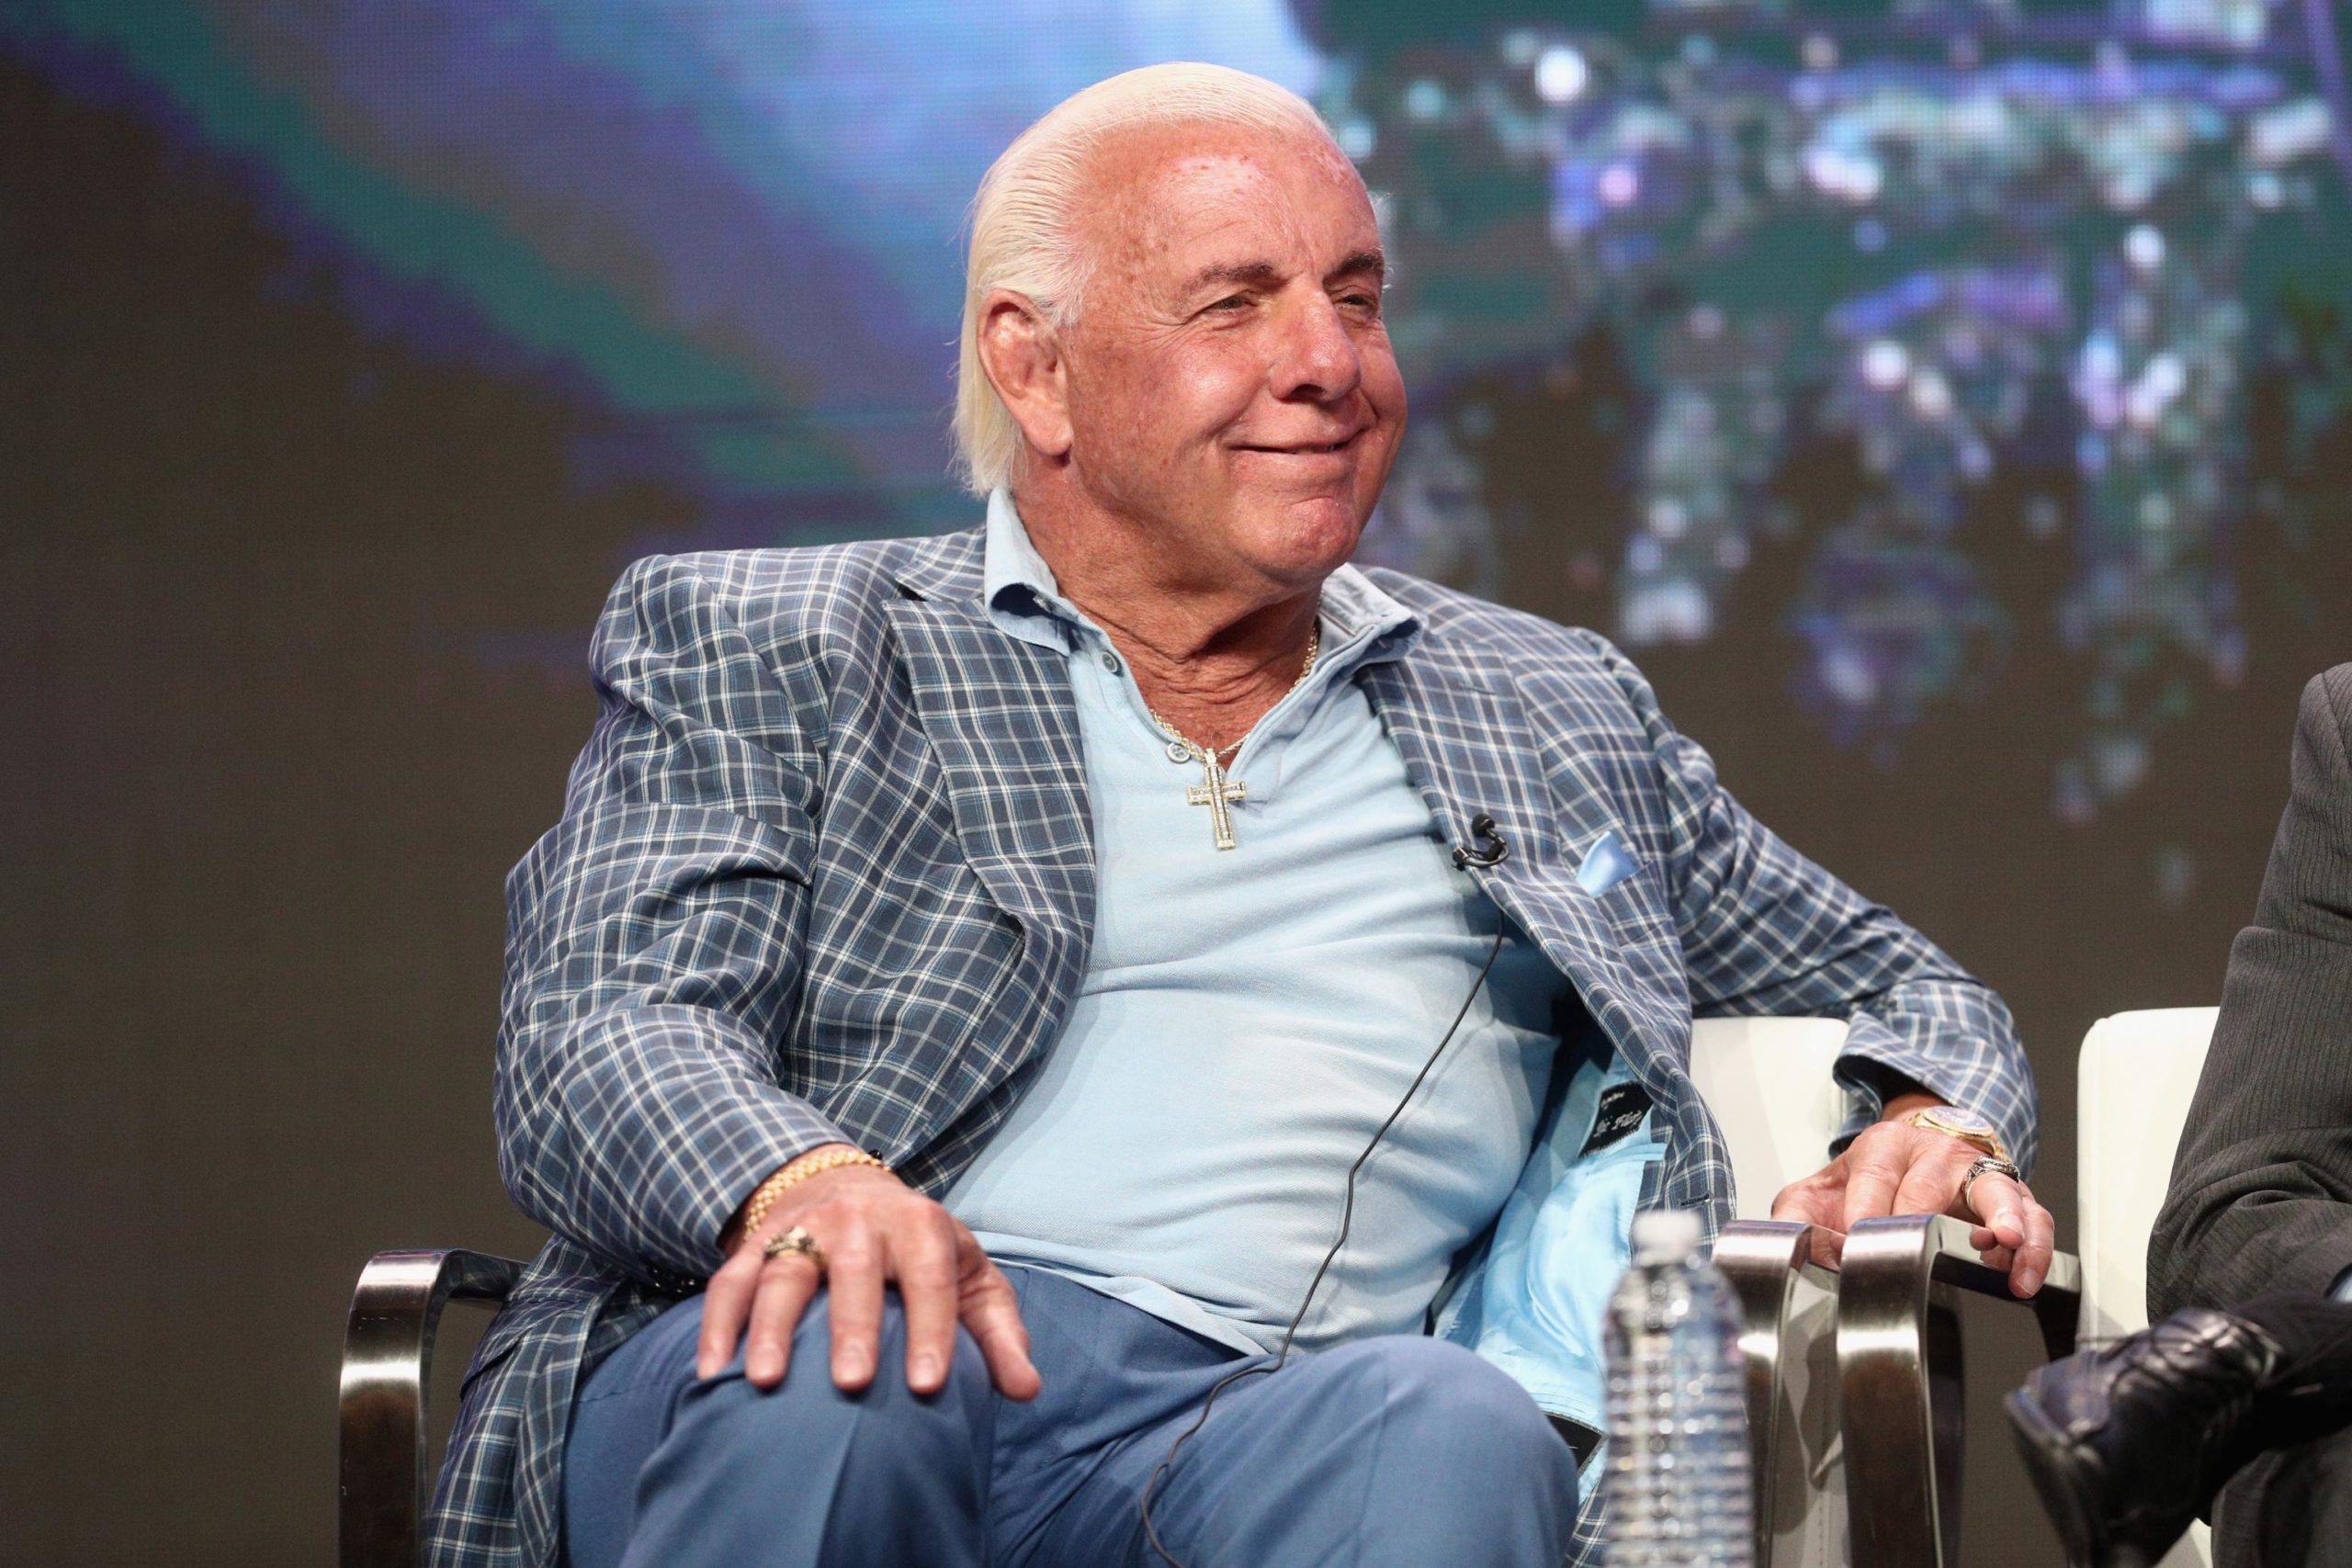 Ric Flair's last significant appearance was last year